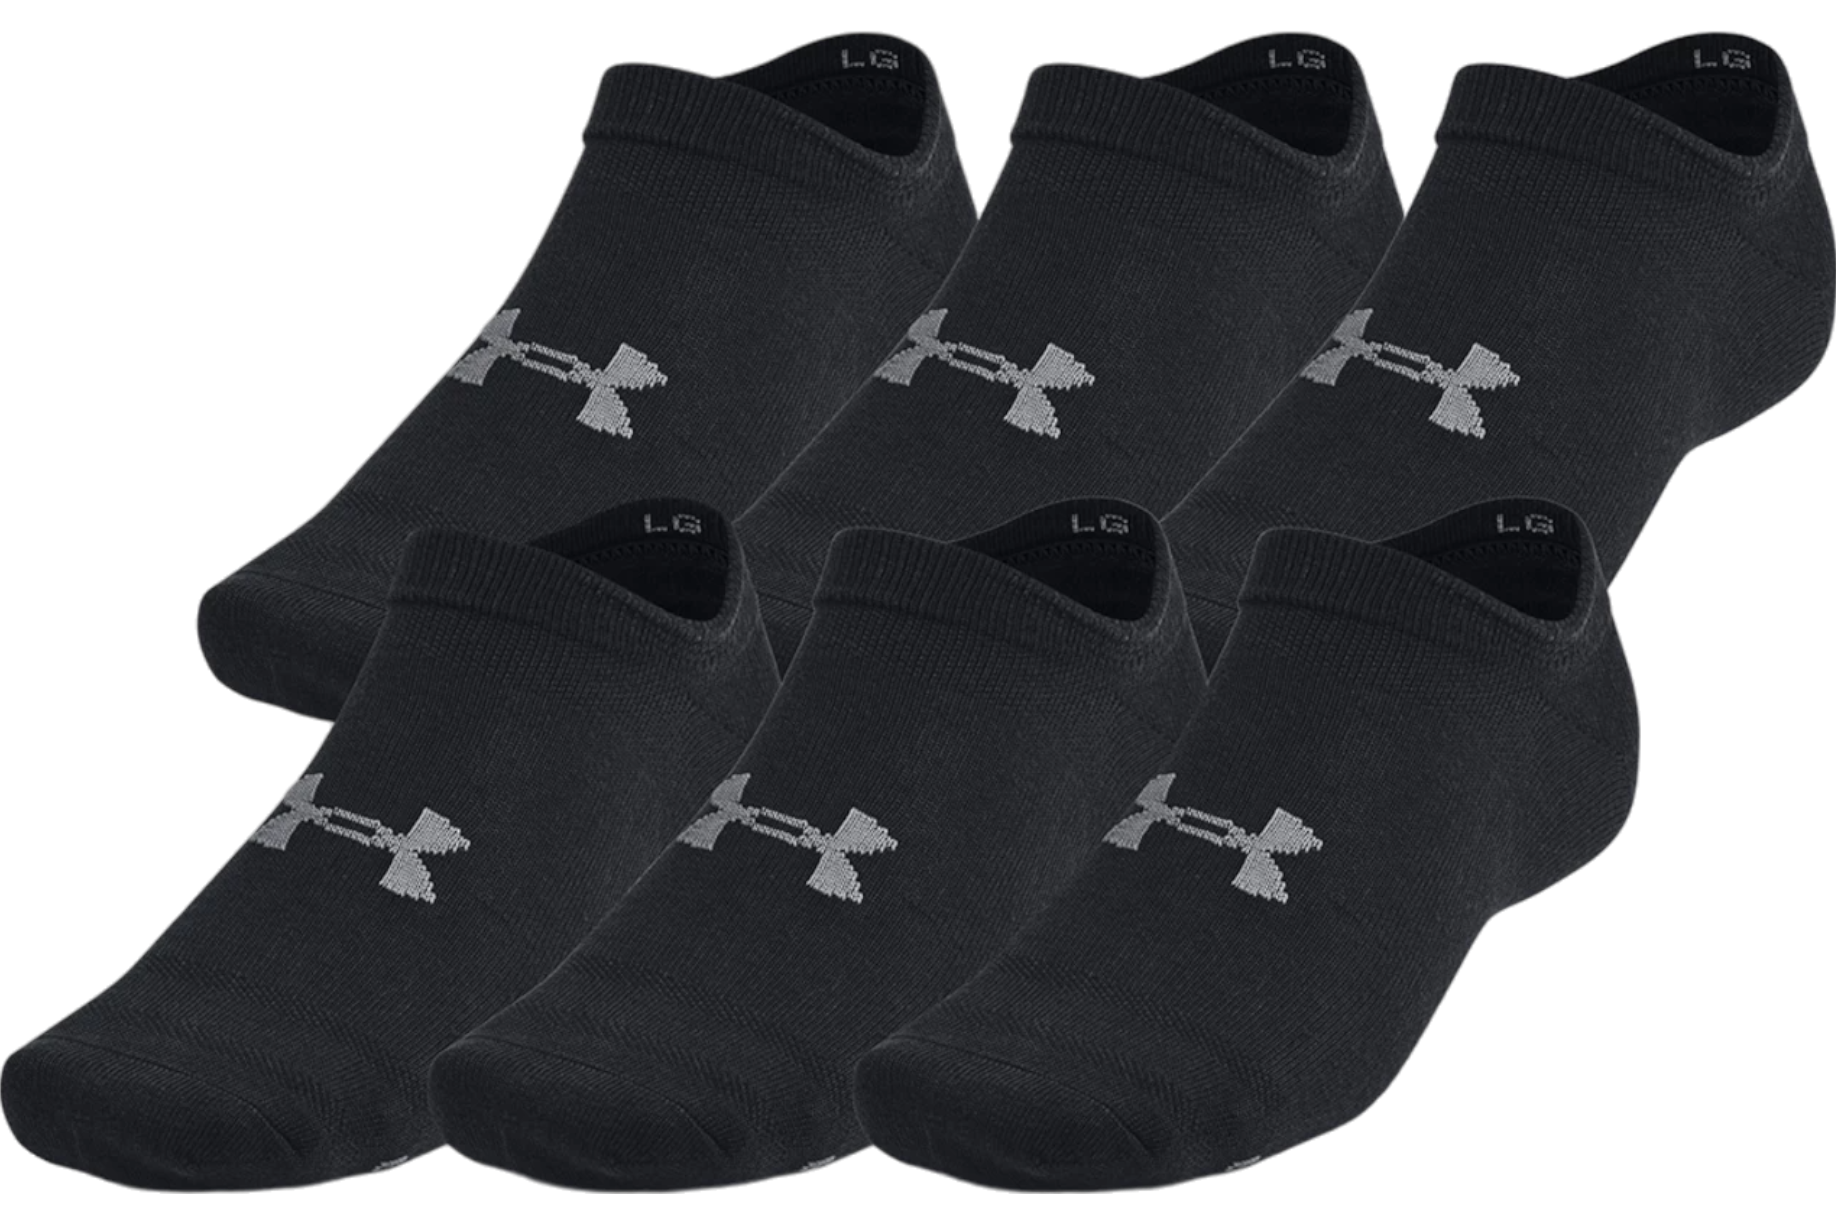 Nogavice Under Armour Essential 6-Pack No-Show Socks